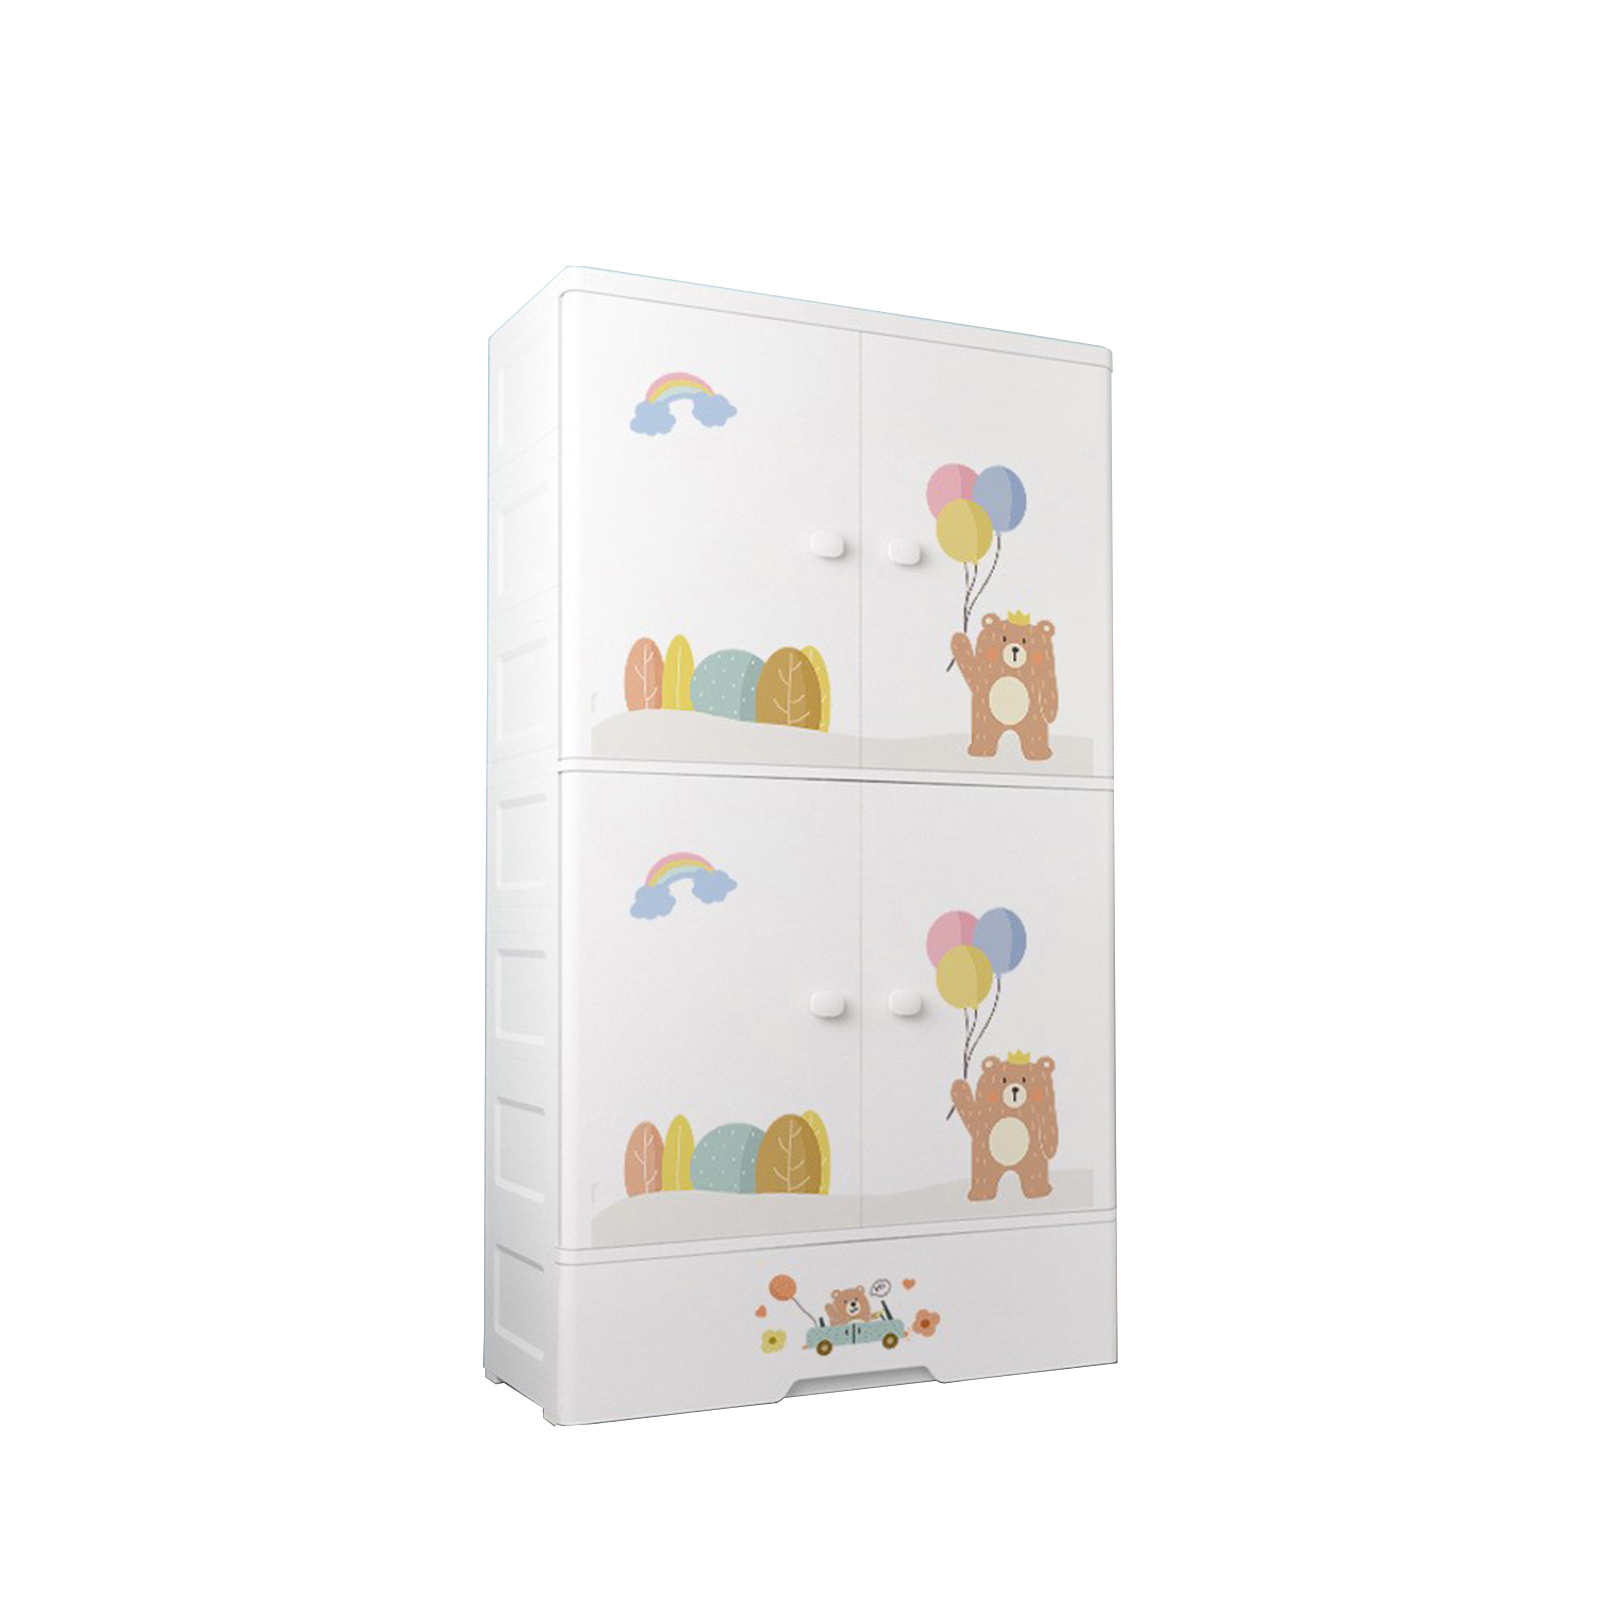 Romantic Bear (Hanging clothes compartment 1 layer drawer